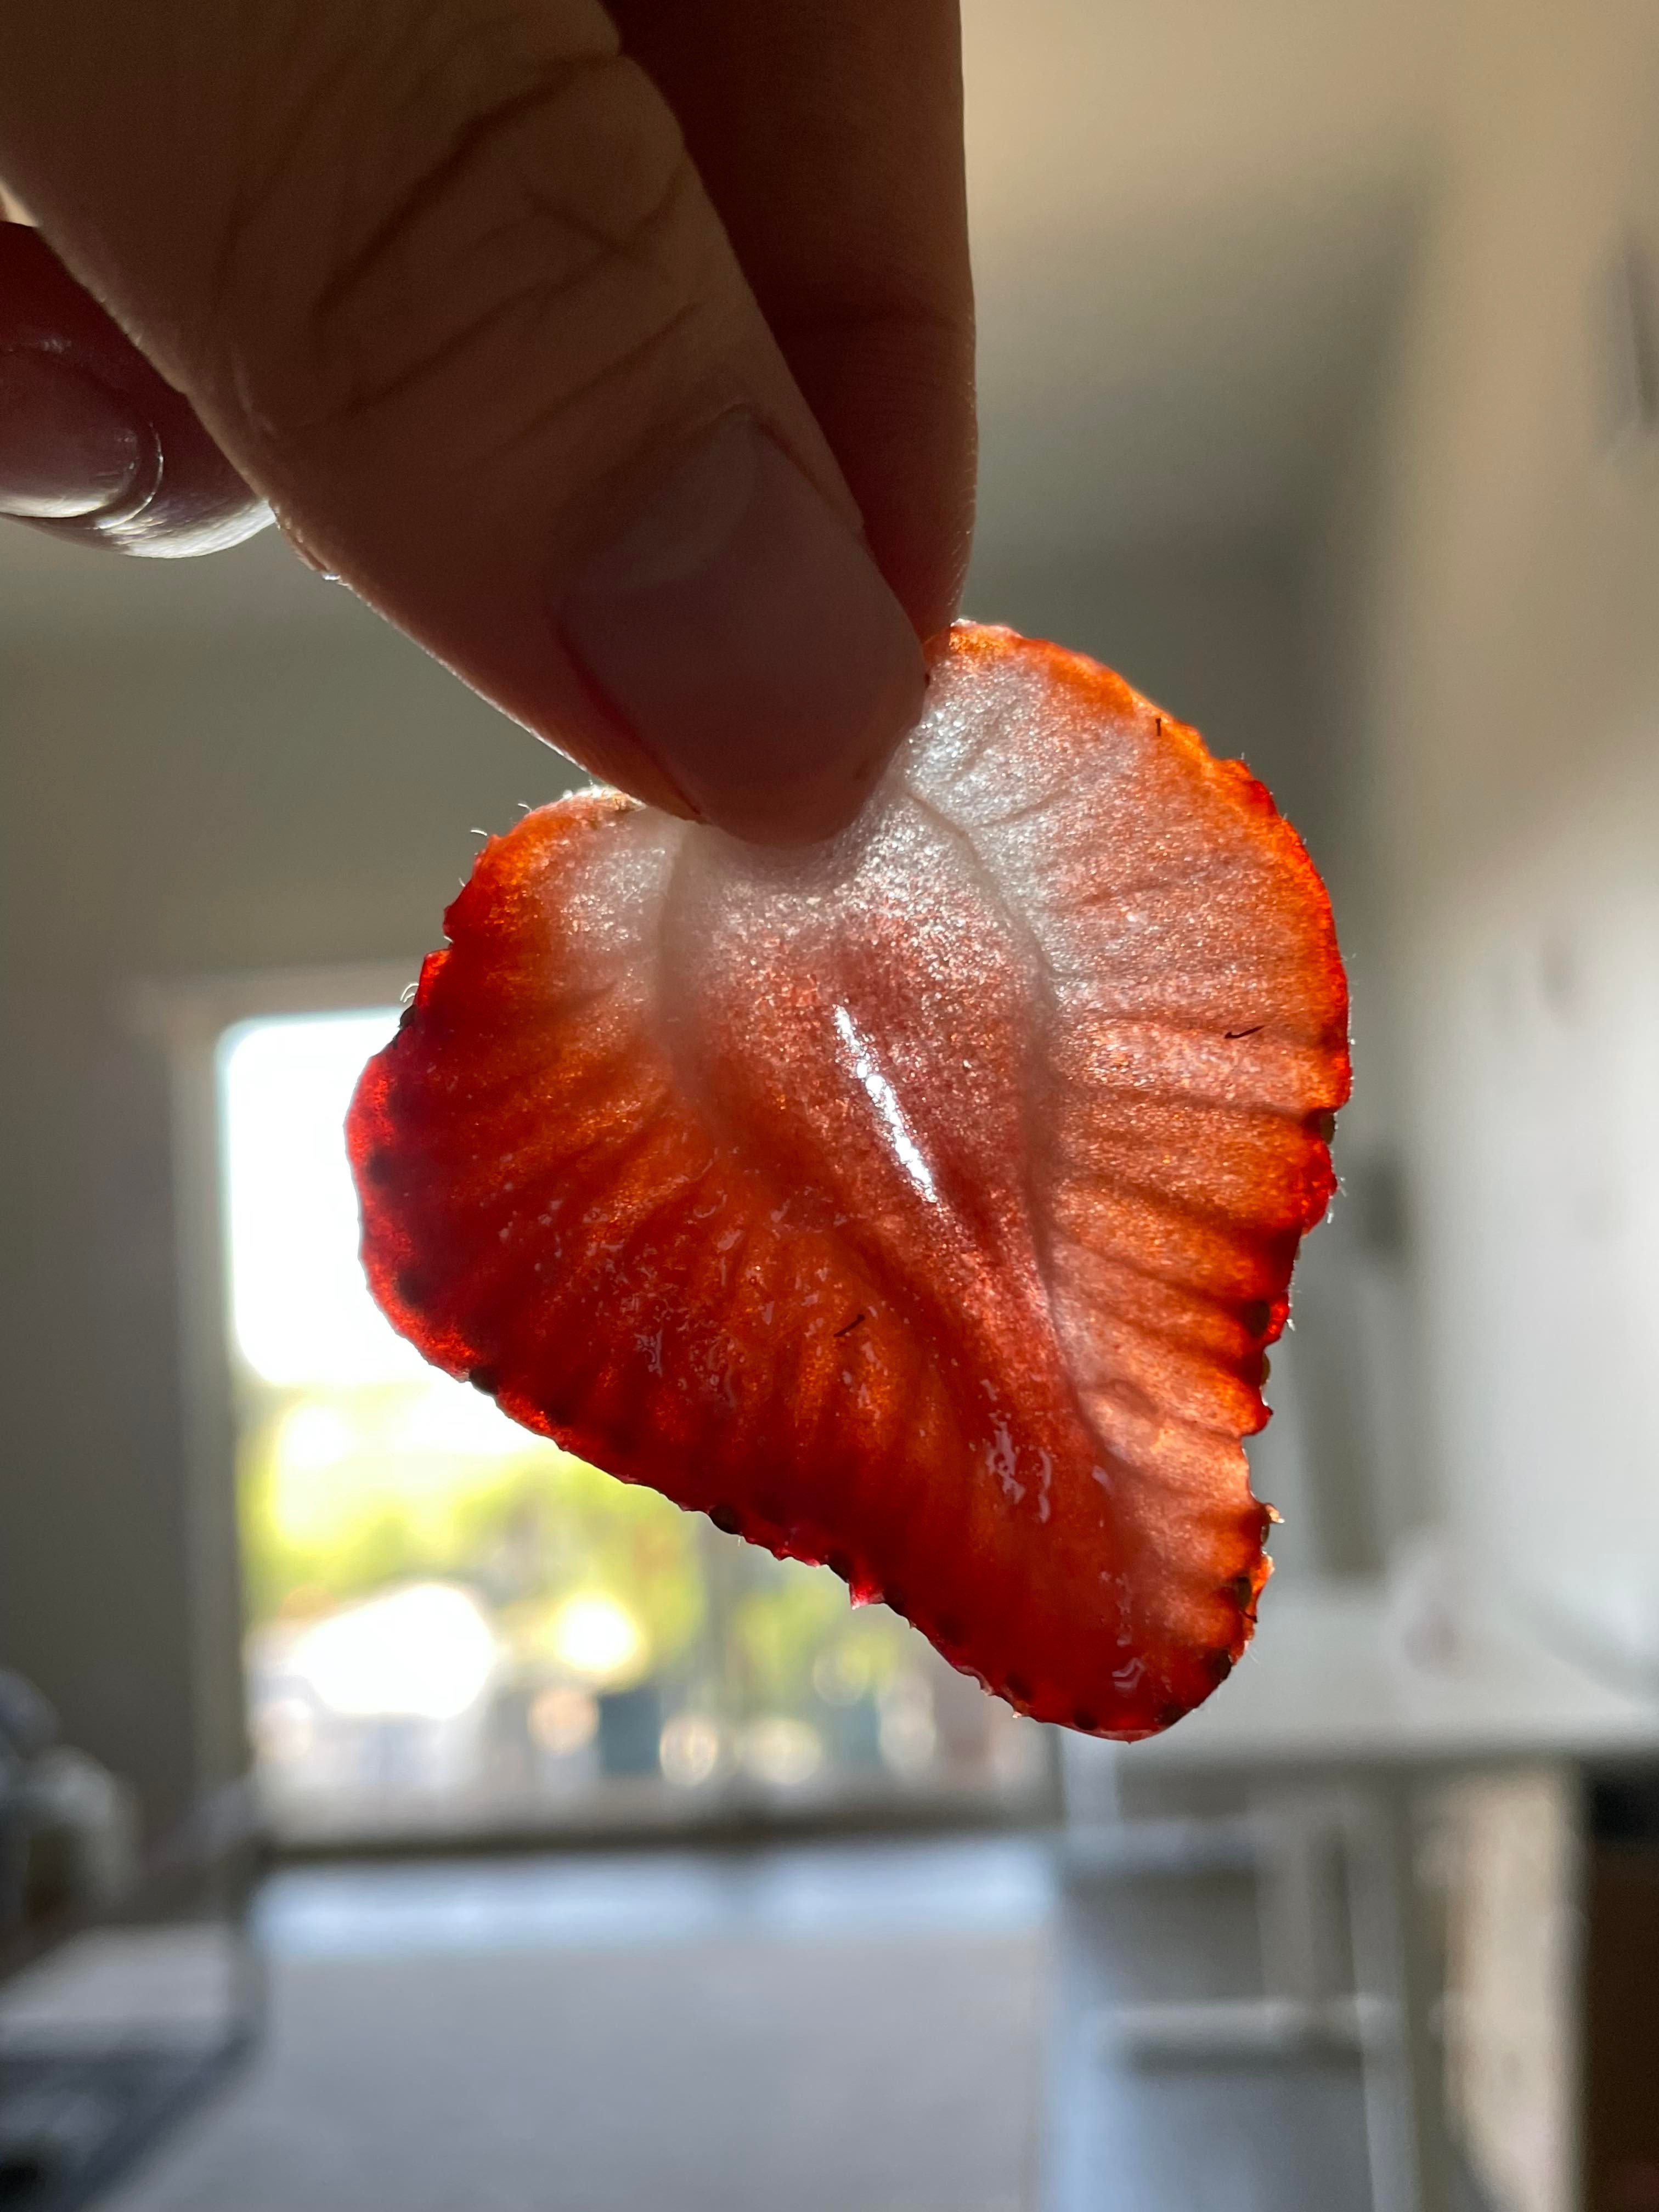 strawberry sliced very thinly so light shines through